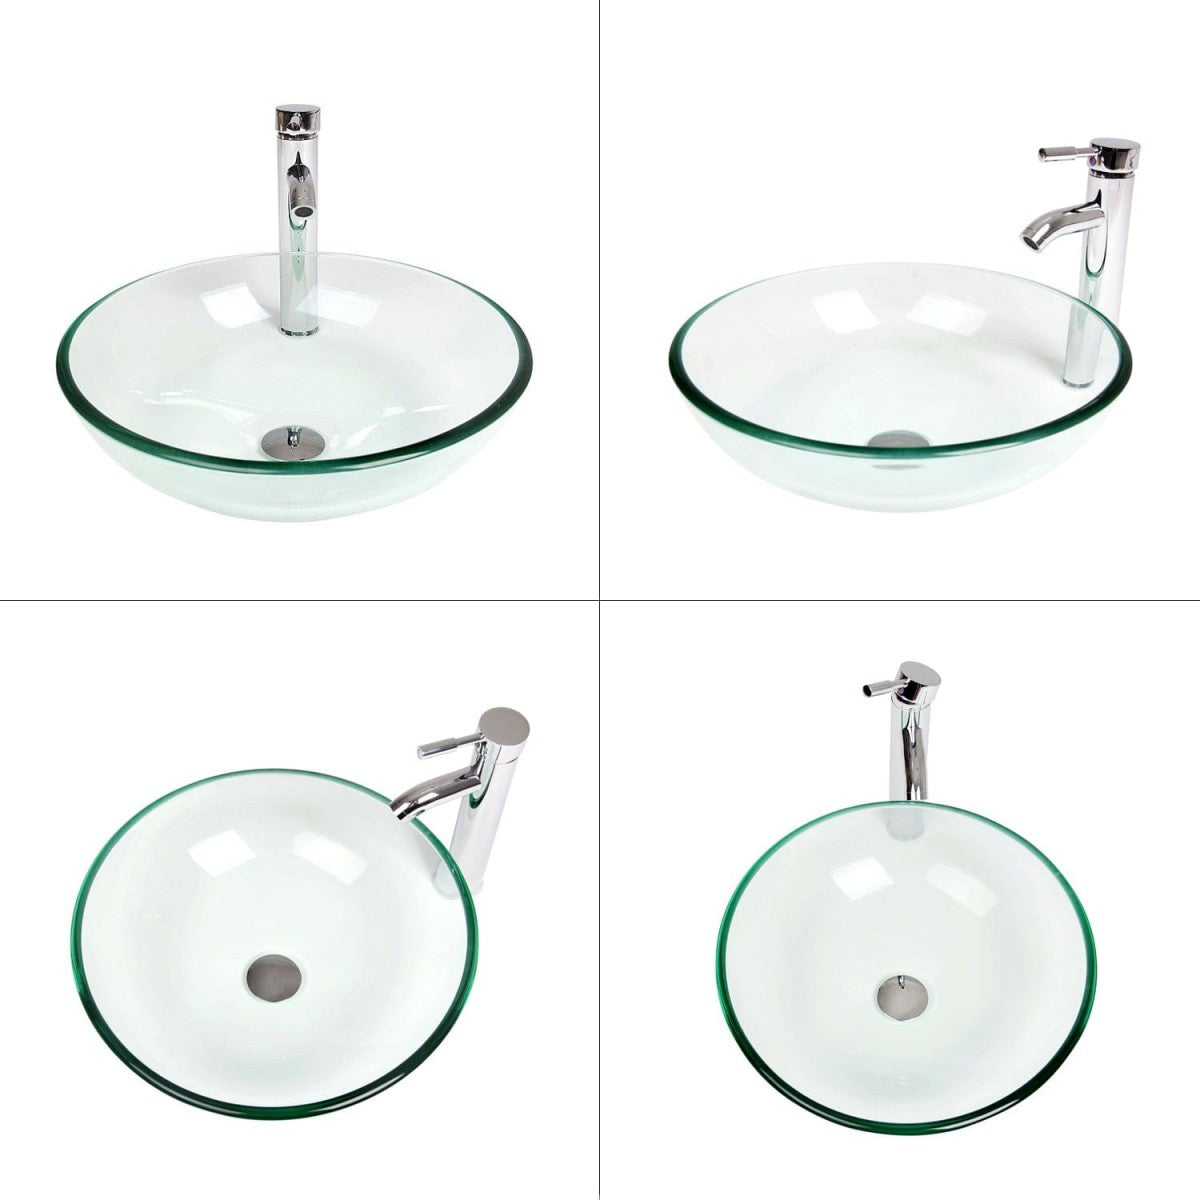 Four angle views of Elecwish Glossy Glass Sink